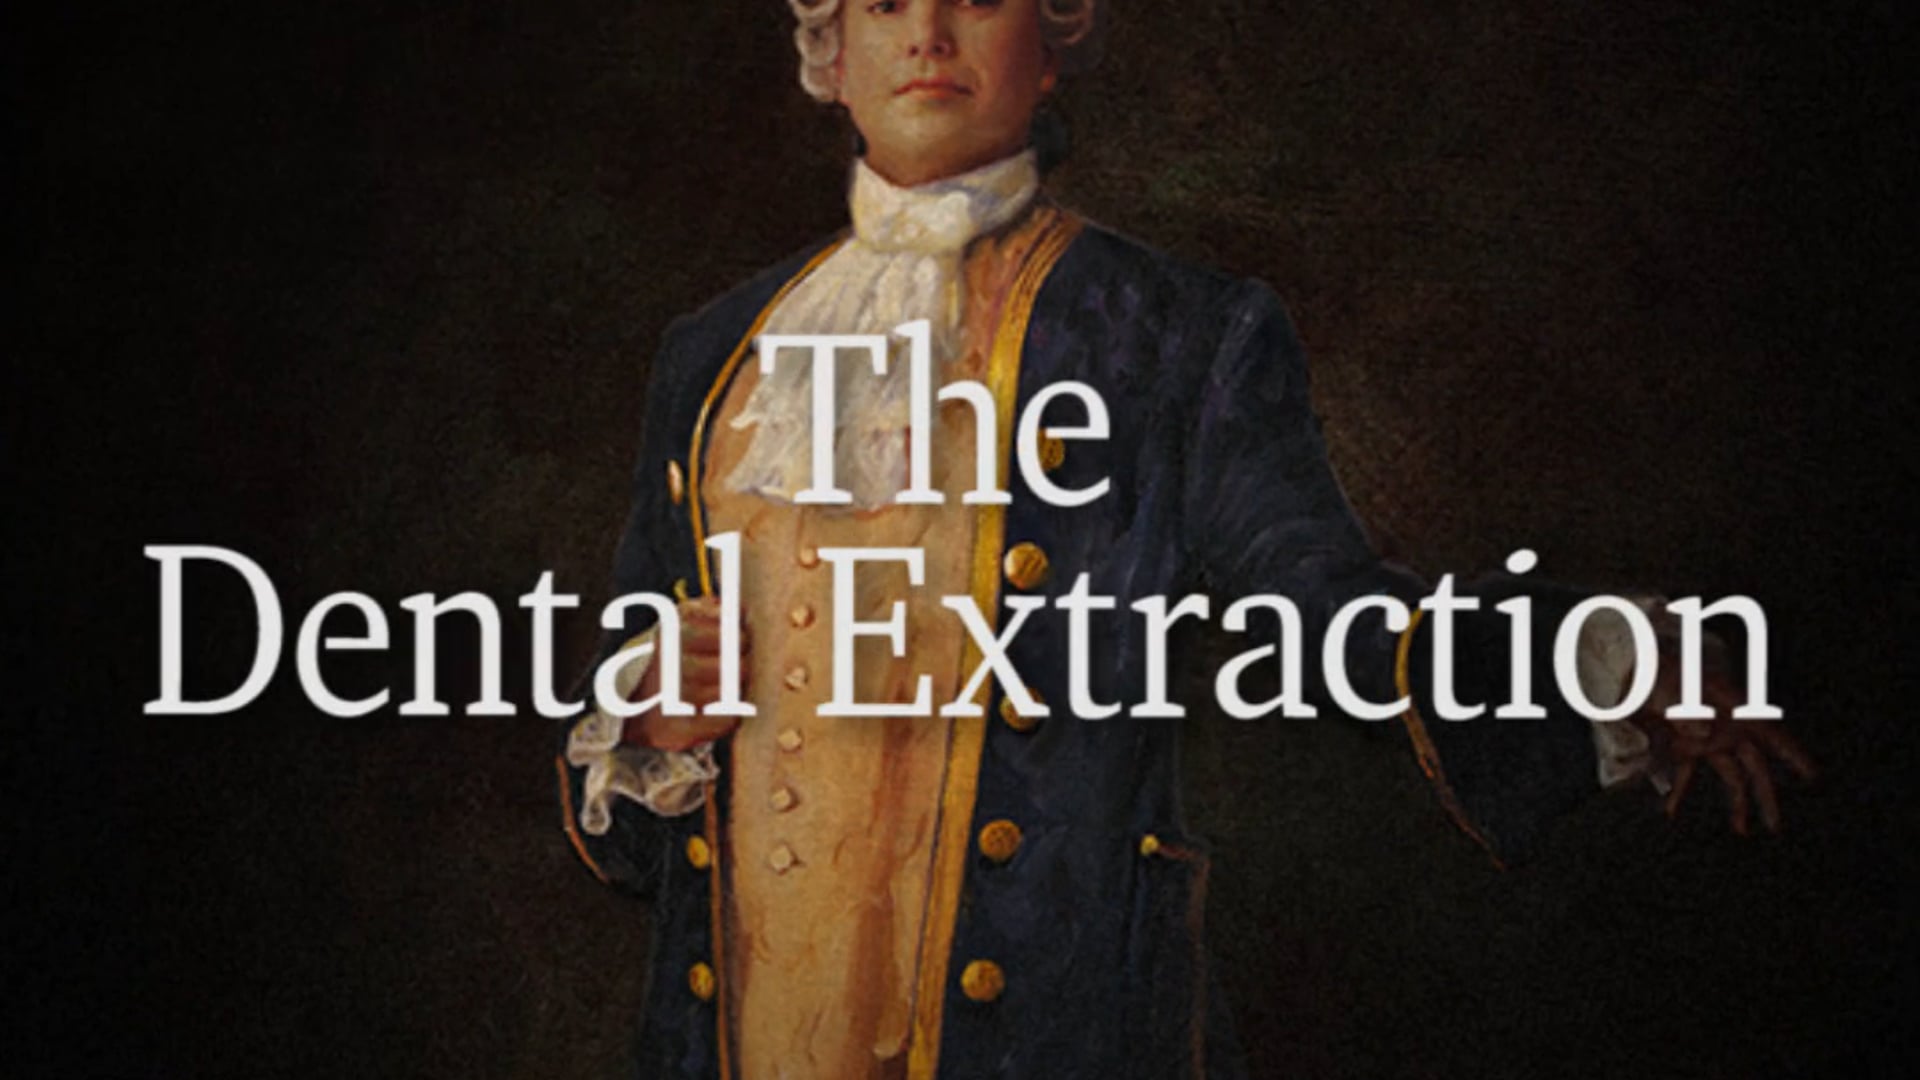 Horrors of 1719 Part 3 - The Dental Extraction